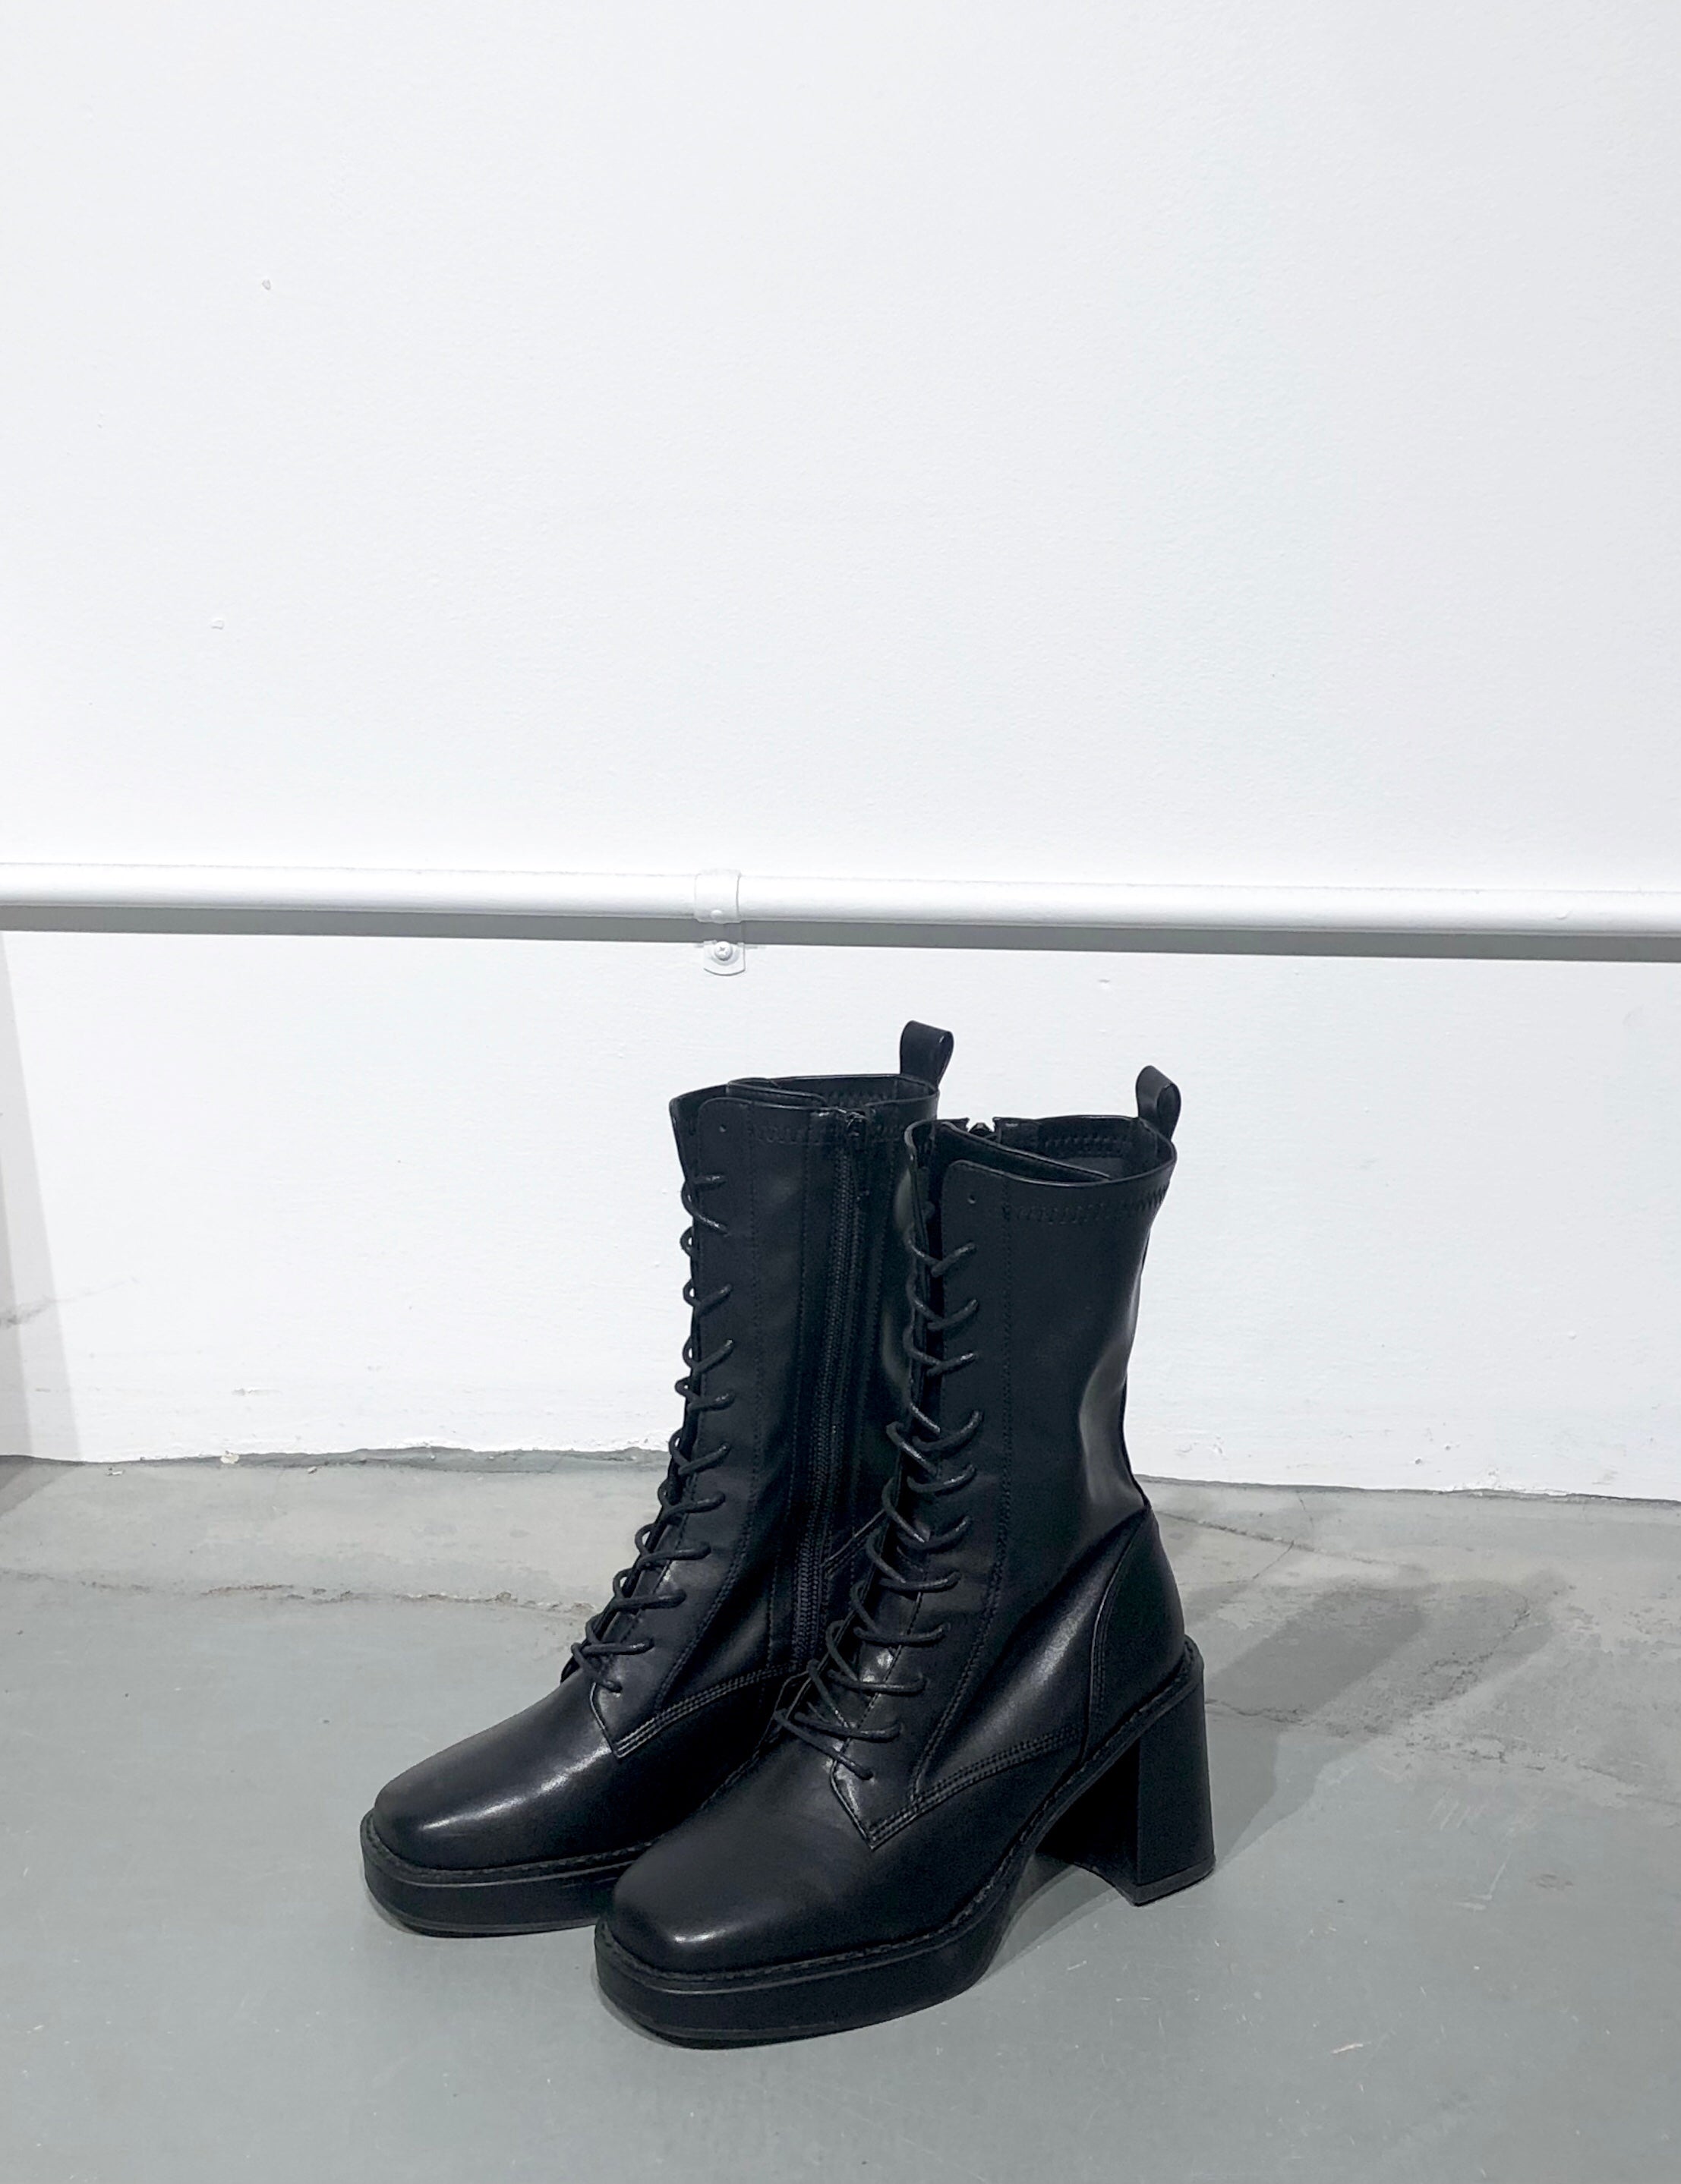 Kiren Laced-up Boots